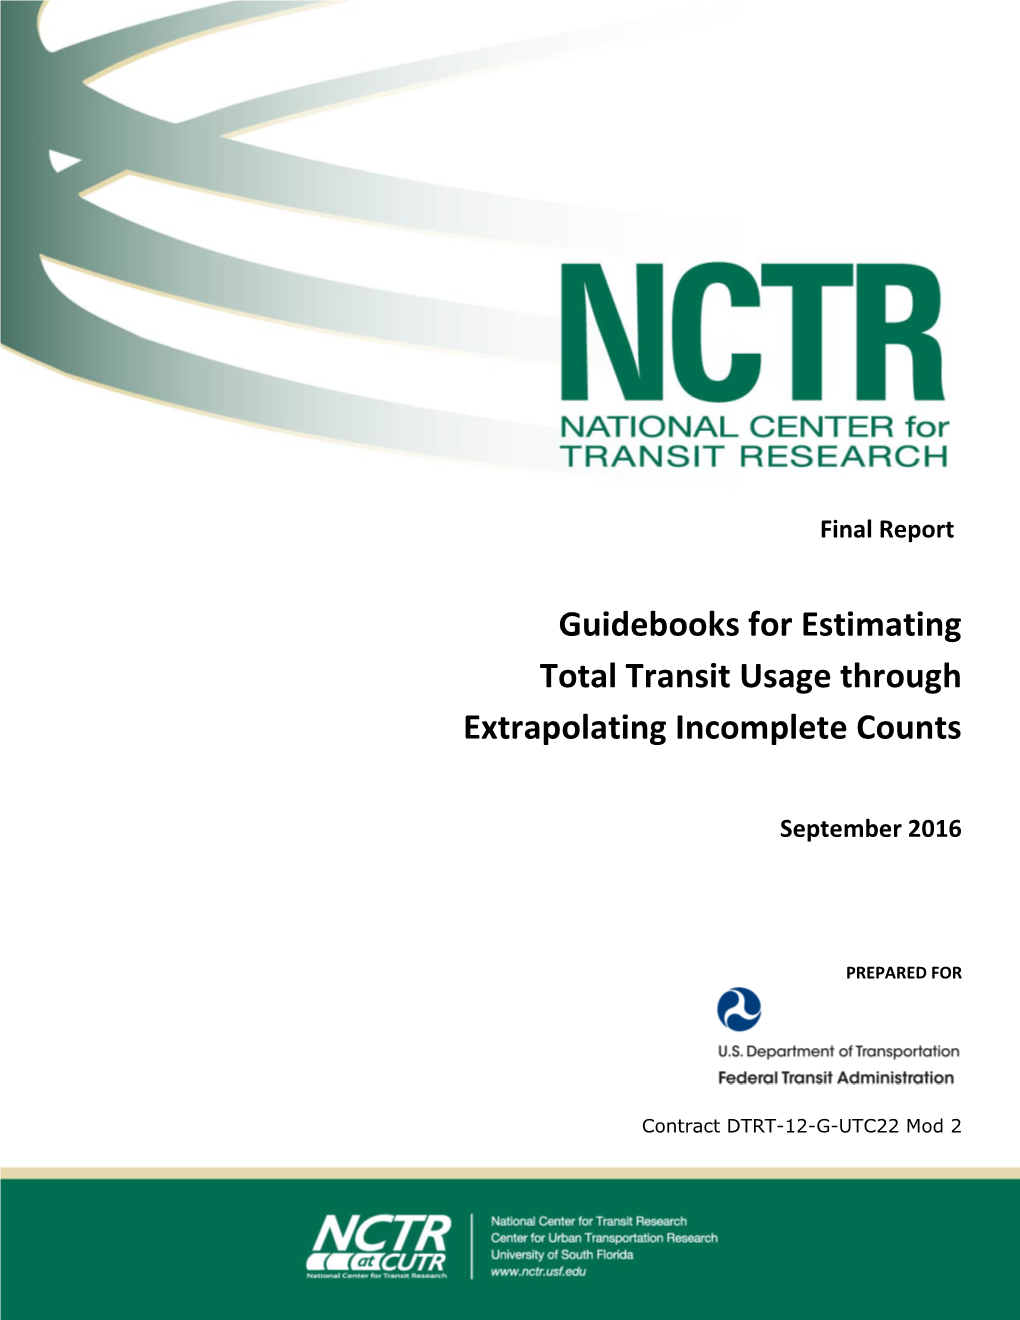 Guidebooks for Estimating Total Transit Usage Through Extrapolating Incomplete Counts